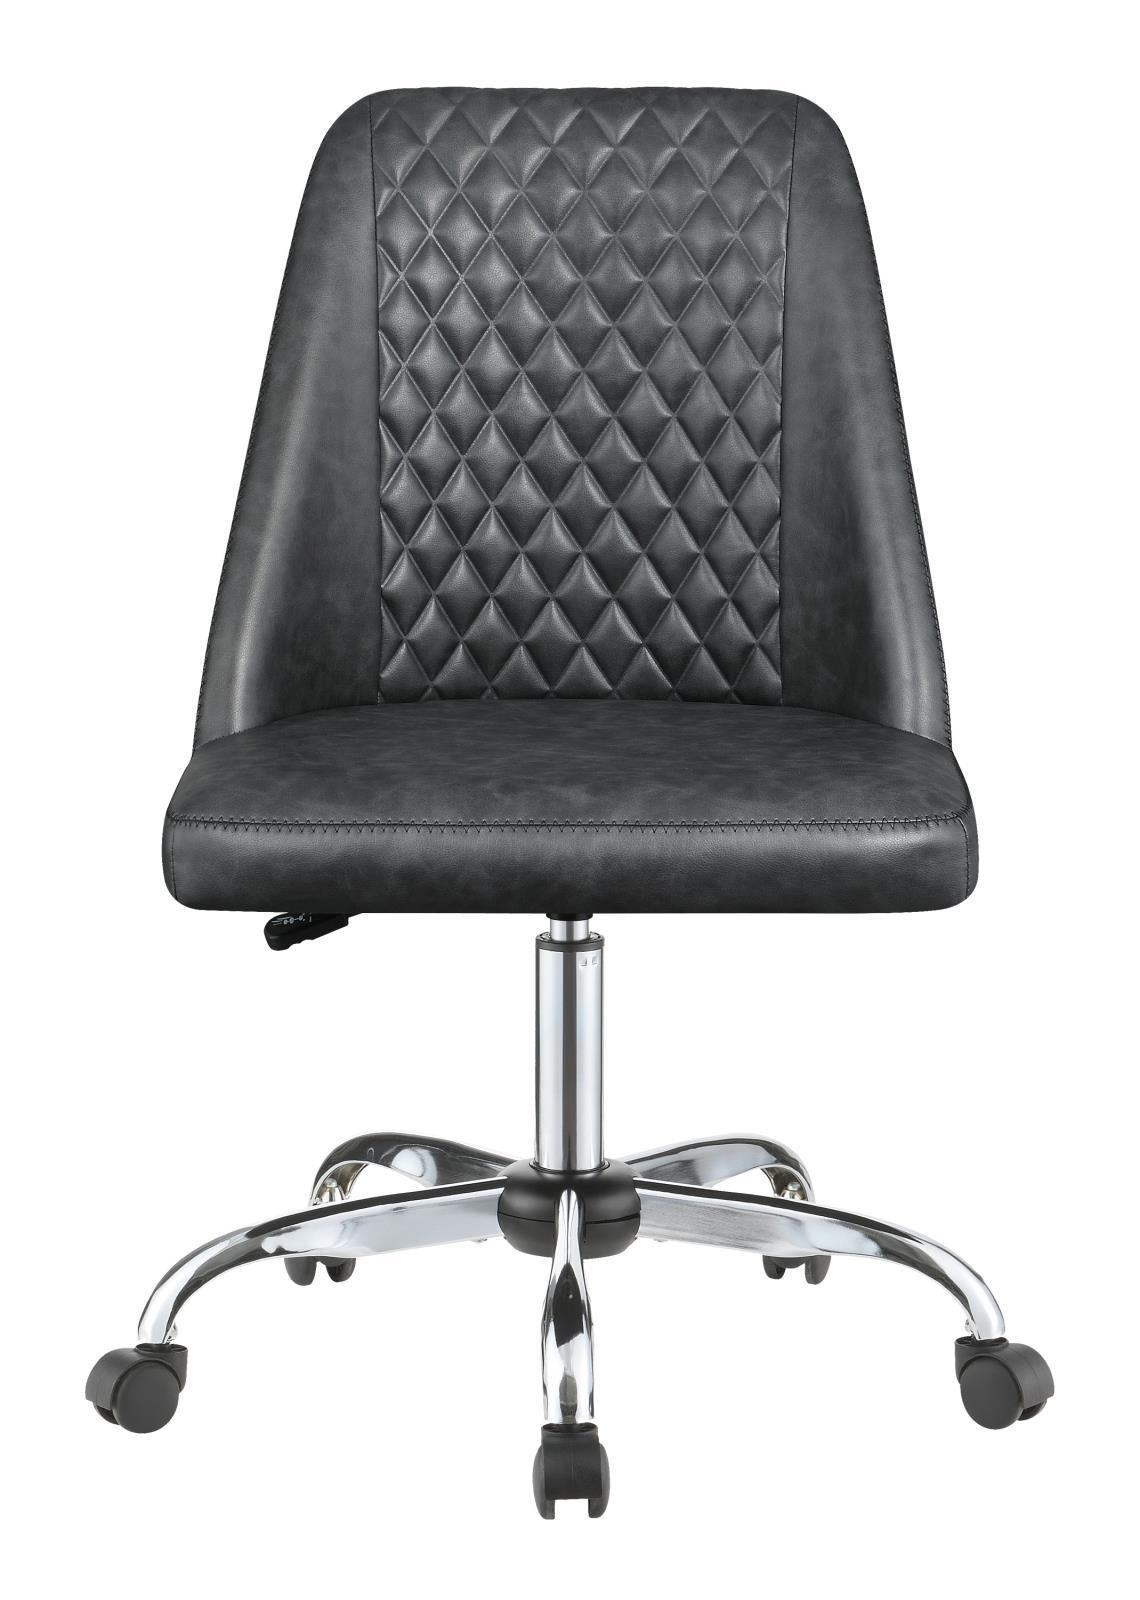 Althea Upholstered Tufted Back Office Chair Grey and Chrome Althea Upholstered Tufted Back Office Chair Grey and Chrome Half Price Furniture